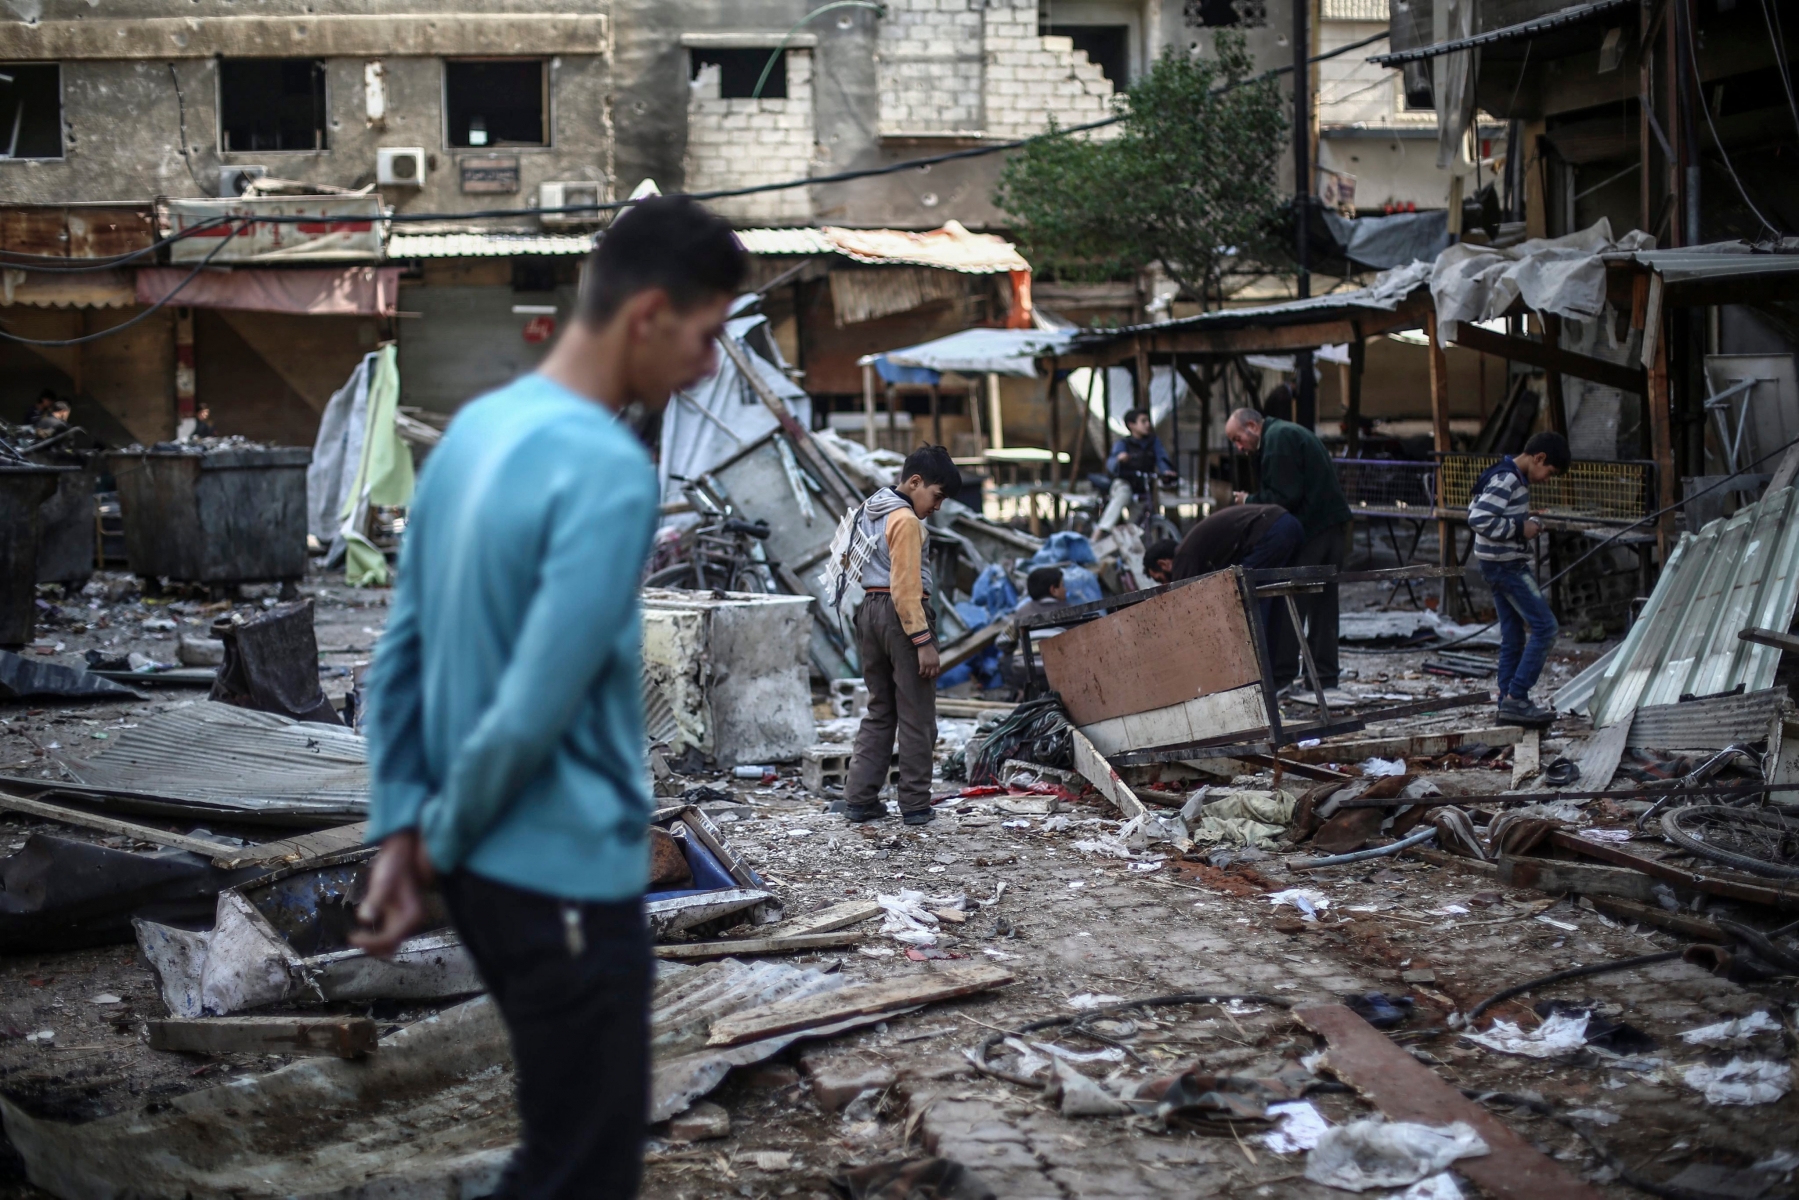 JAHRESRUECKBLICK 2015 - OKTOBER - Syrian inspect a destroyed market place following what local activists say was an airstrike by forces loyal to the al-Assad regime in the rebel-held area of Douma, outskirts of Damascus, Syria, 30 October 2015. According to the Syrian Observatory for Human Rights at least 60 people were killed and over a hundred wounded in the attack on the busy market. (KEYSTONE/EPA/MOHAMMED BADRA) JAHRESRUECKBLICK 2015 - OKTOBER - SYRIEN KONFLIKT